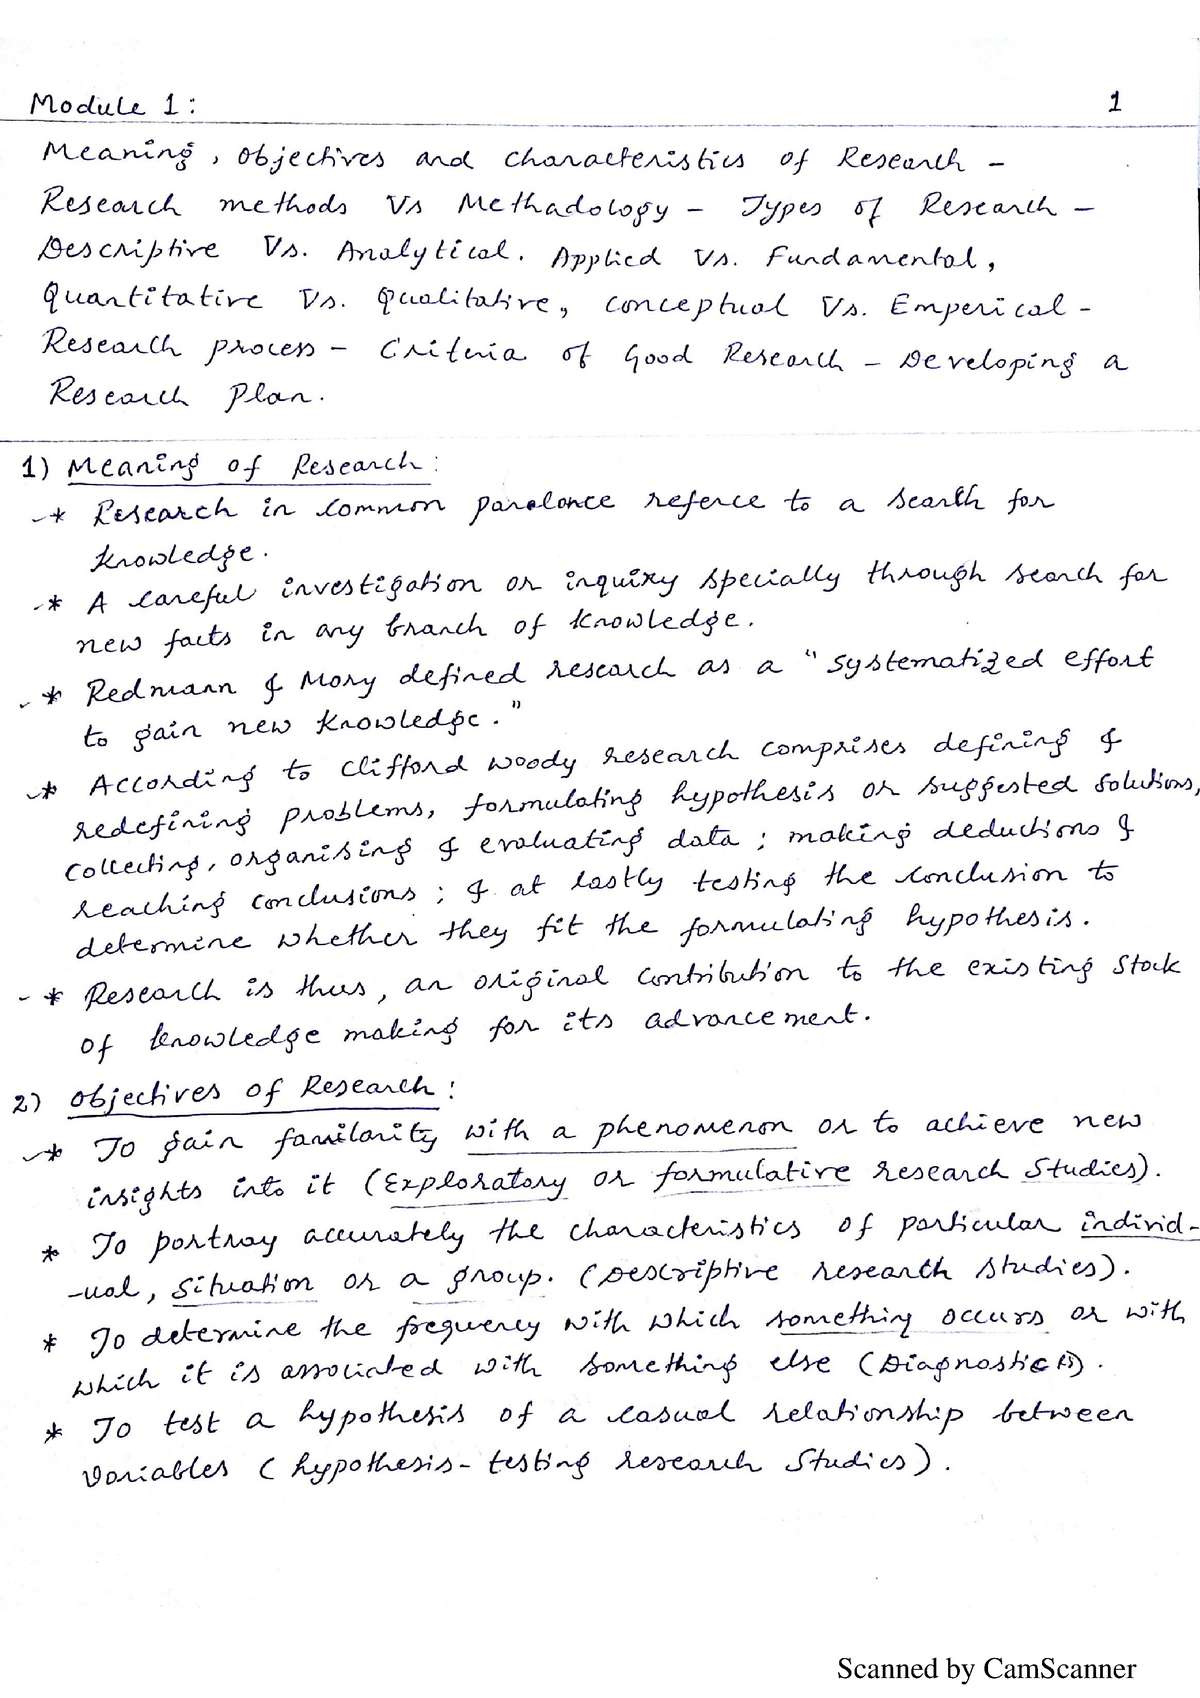 research and methodology notes pdf